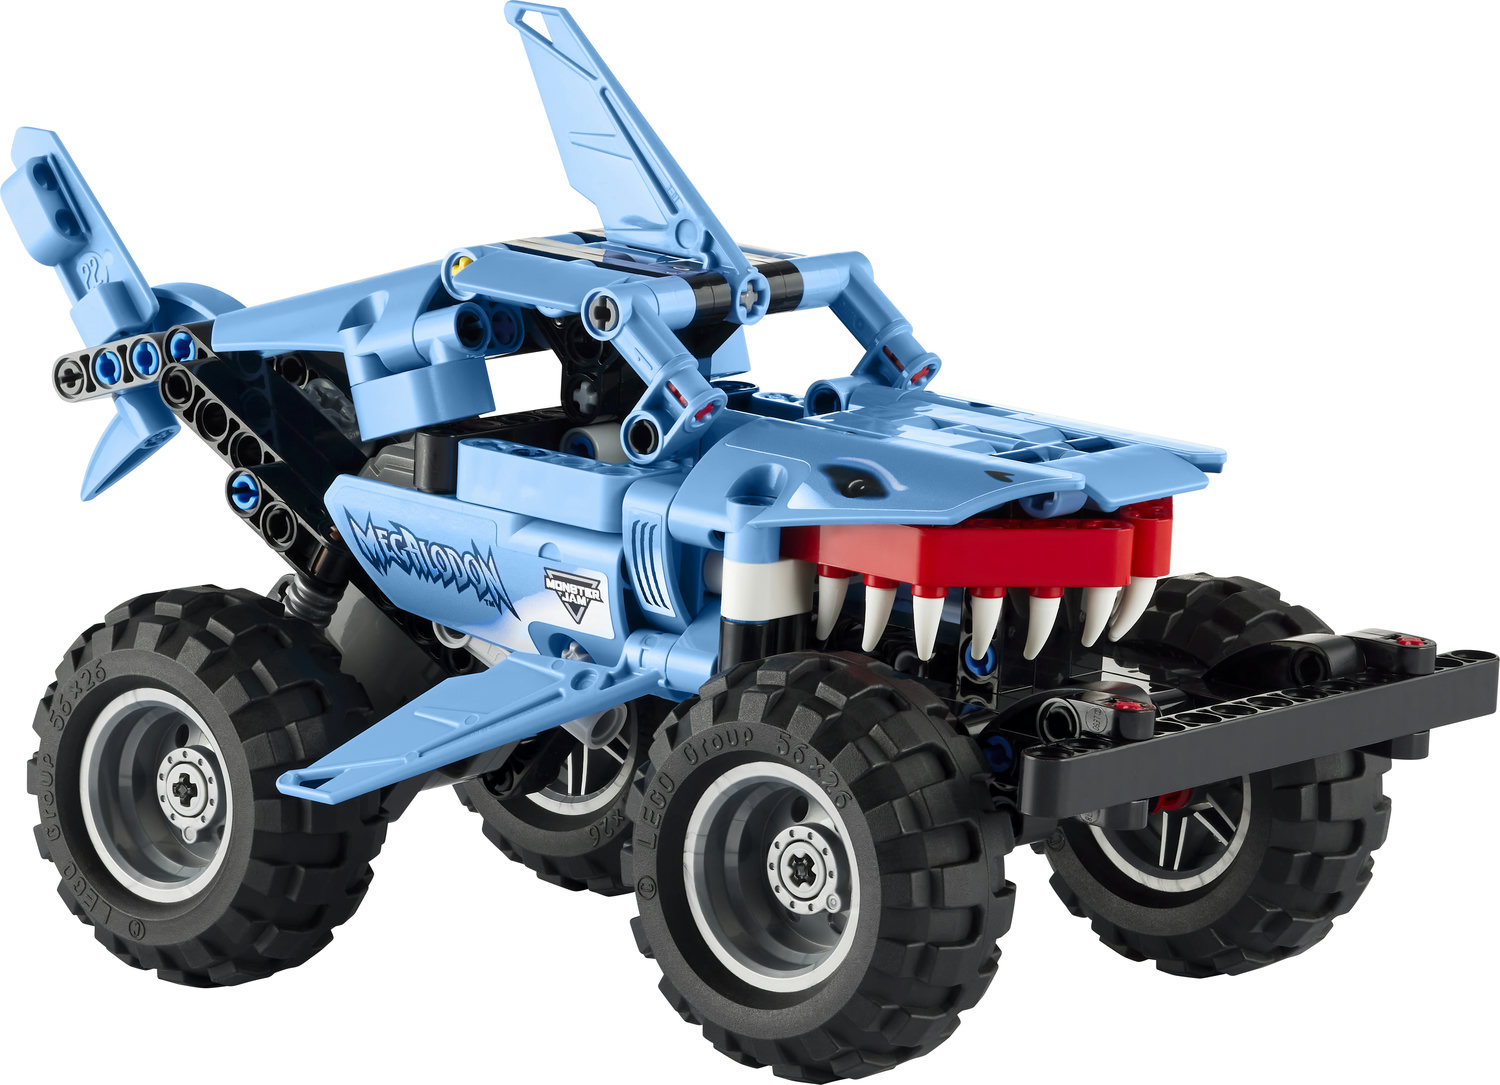 LEGO Technic Monster Jam Megalodon 42134 2 in 1 Pull Back Shark Truck to Lusca Low Racer Car Toy, 2022 Series, Set for Kids, Boys and Girls 7 Plus Years Old - image 5 of 10